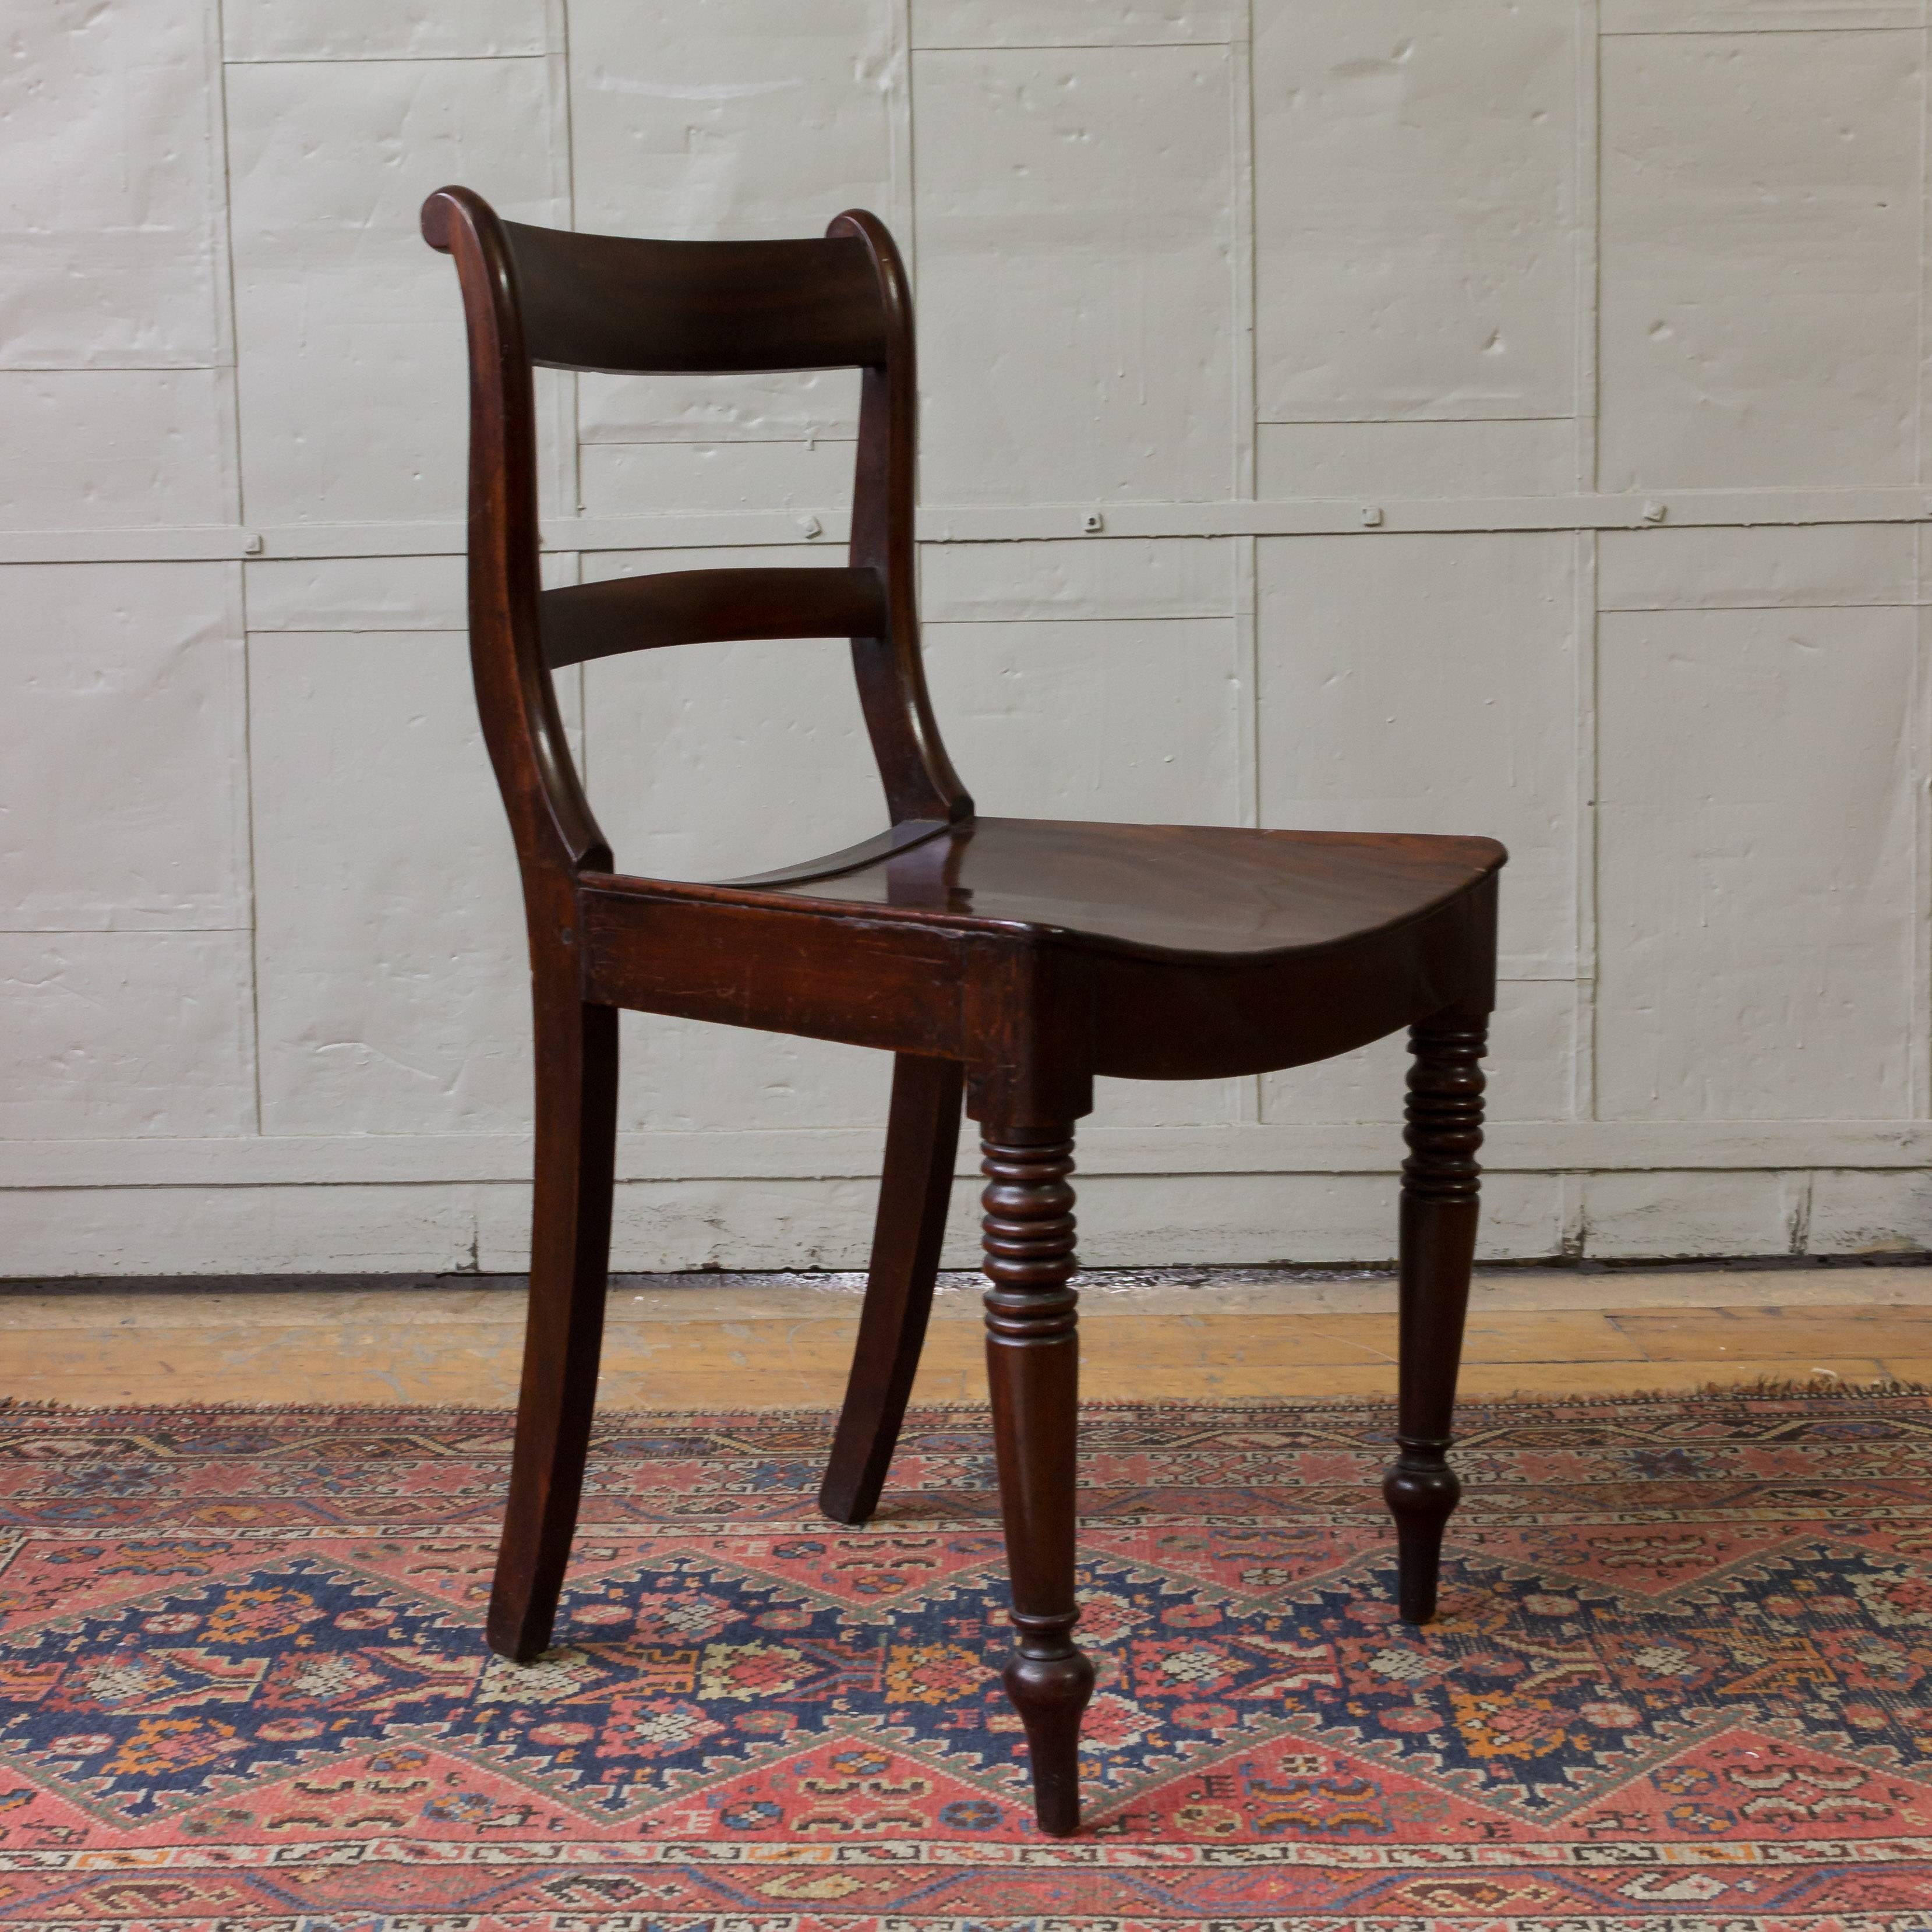 Mahogany side chair with turned legs and curved seat.